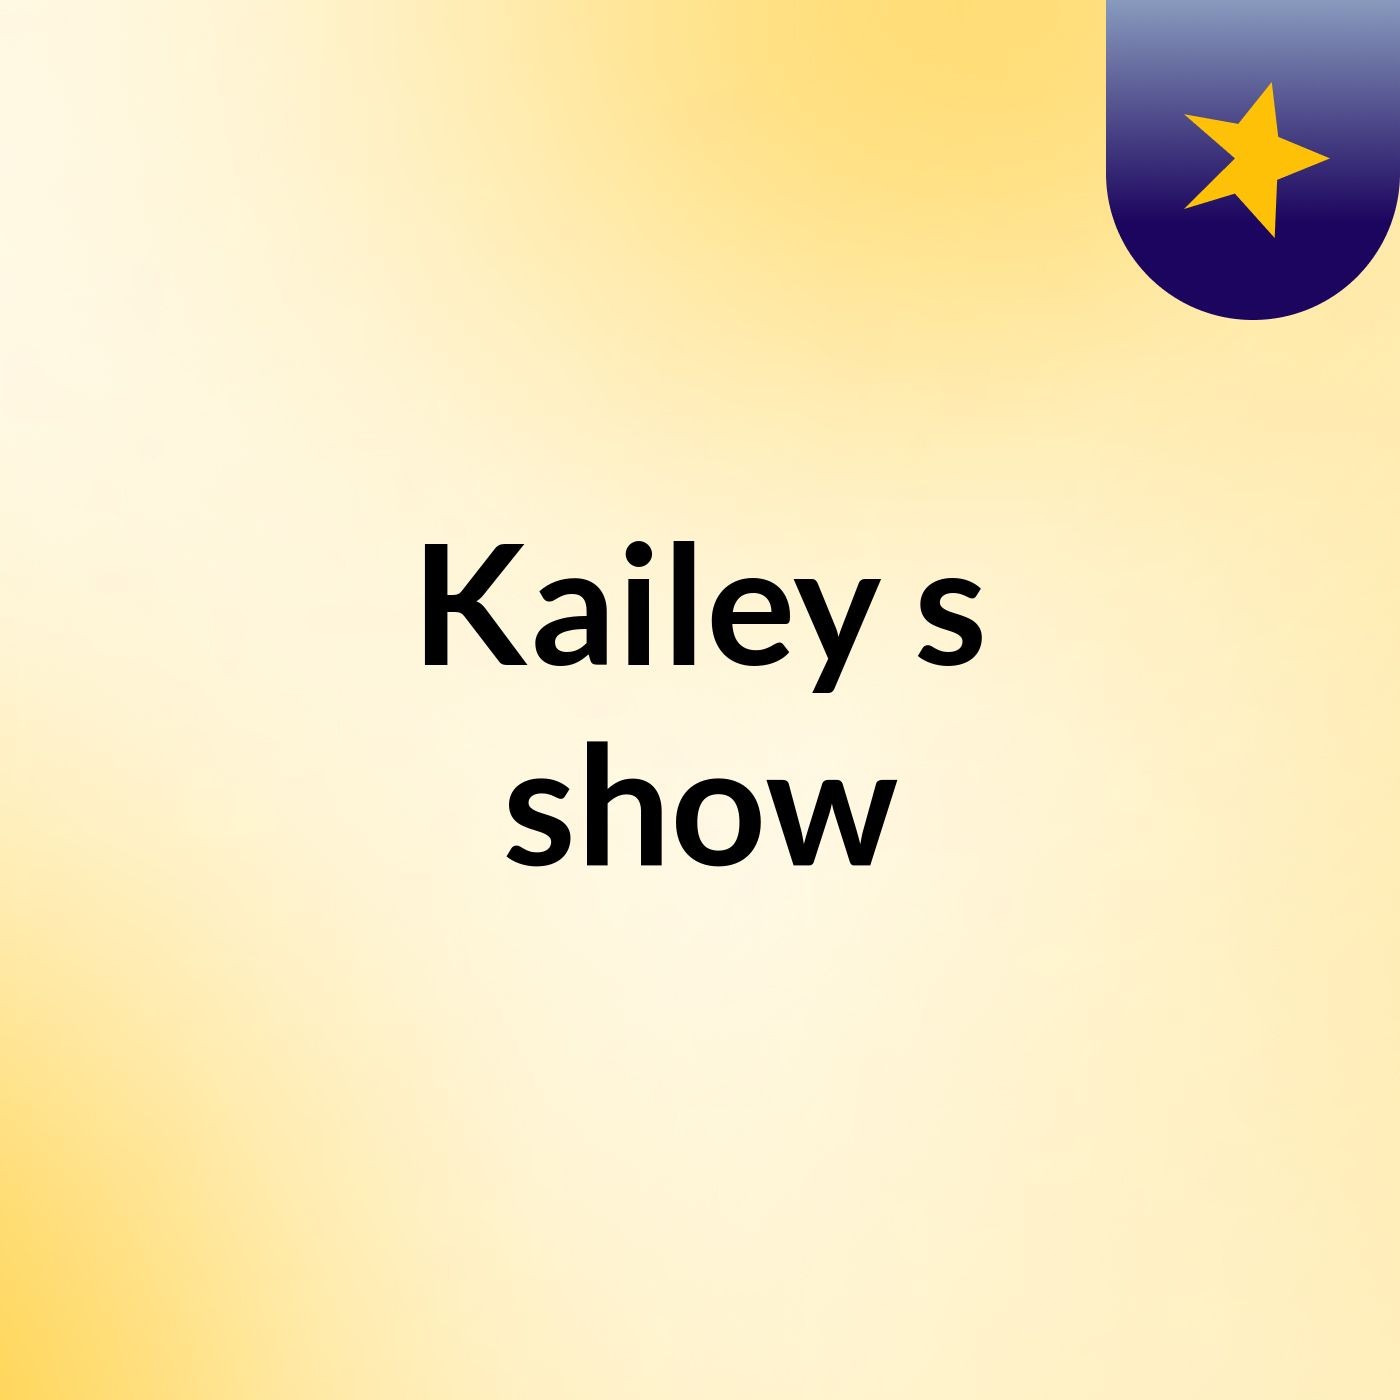 Kailey's show